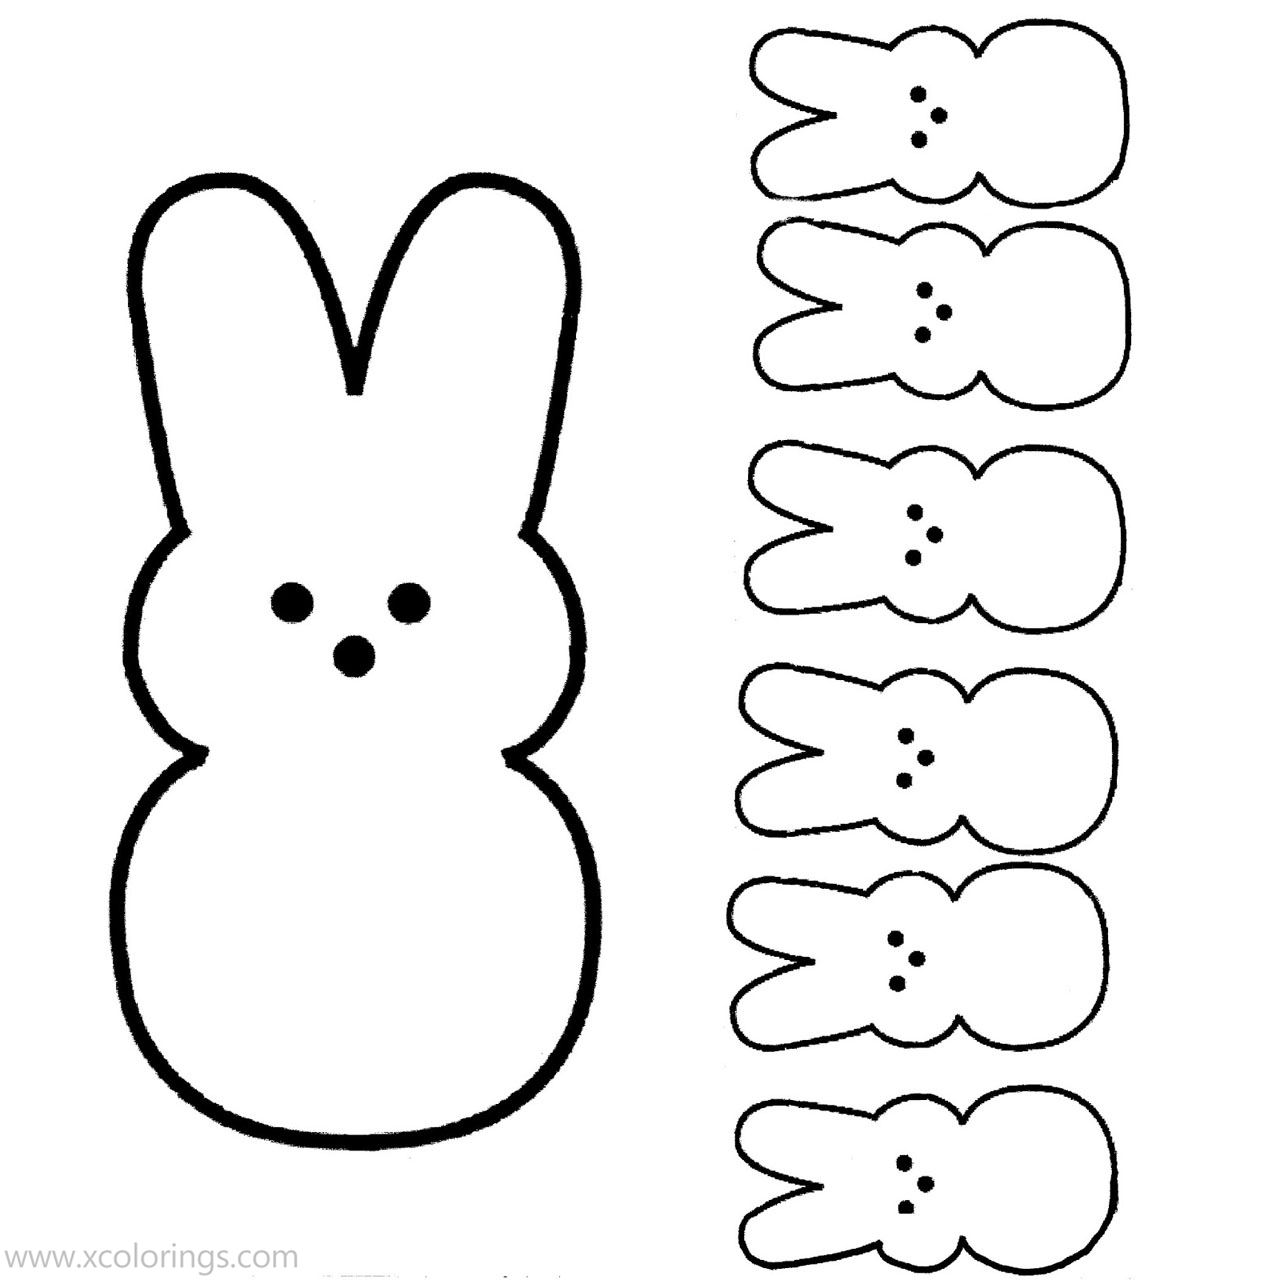 Free Marshmallow Peeps Coloring Pages Peeps Template printable